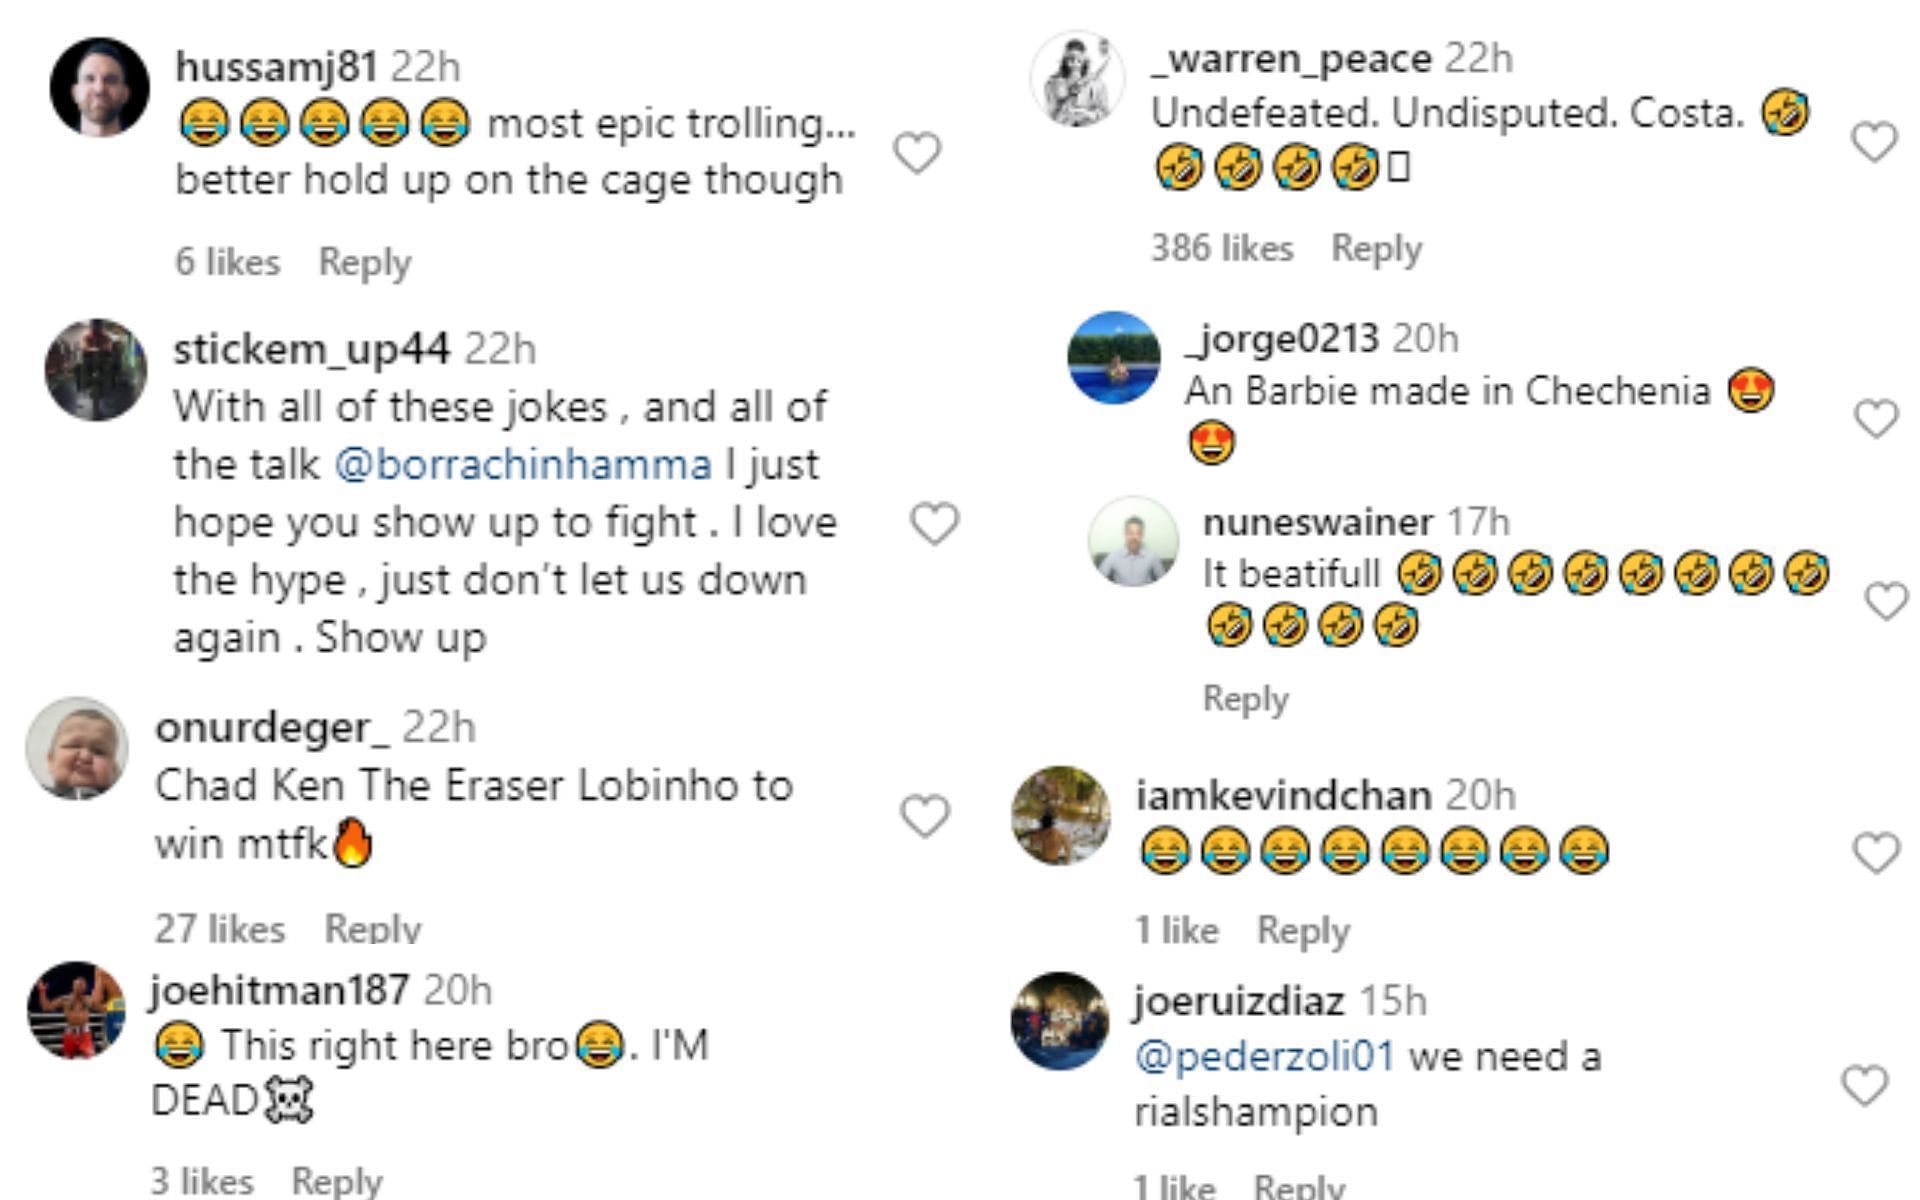 Fans reacting to Paulo Costa&#039;s meme on Khamzat Chimaev posted on his Instagram